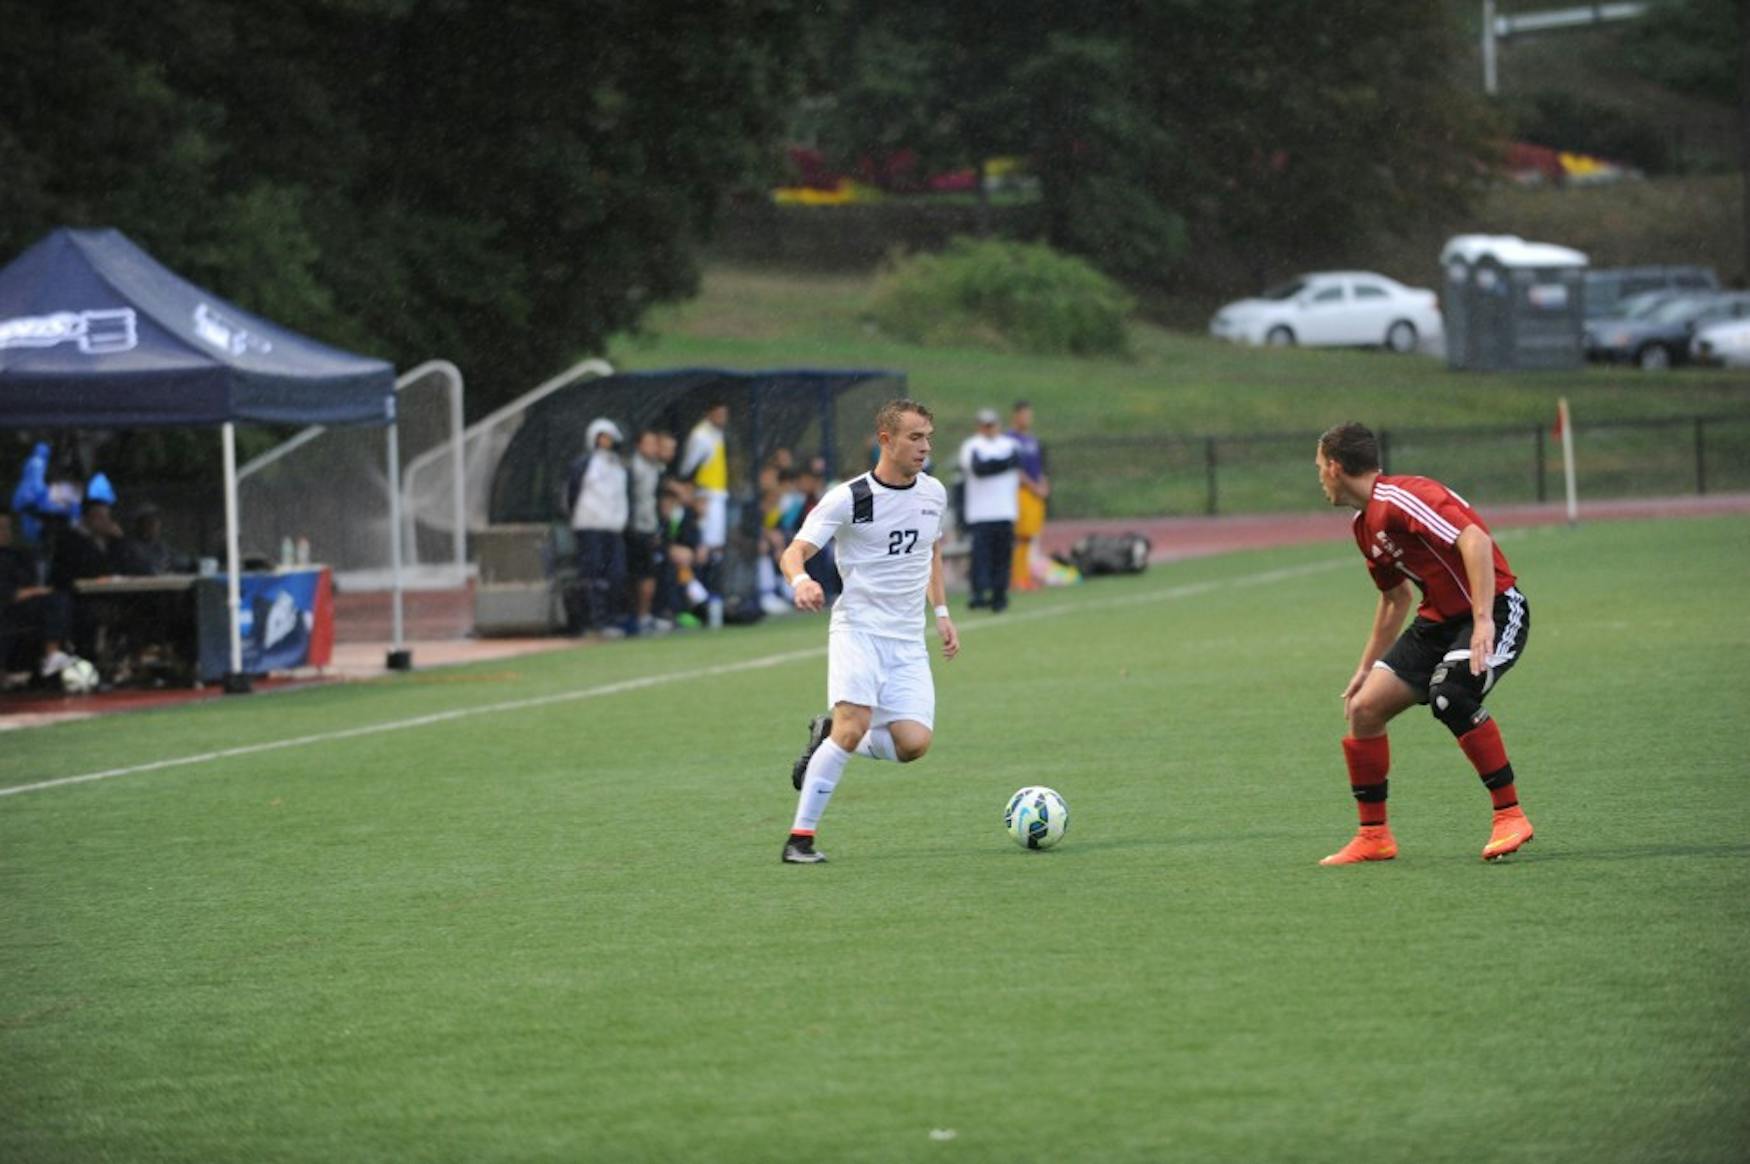 UP TO THE TASK: Forward Evan Jastremski ’17 (left) looks past a Clark University defender during the team’s 4-0 win on Saturday.